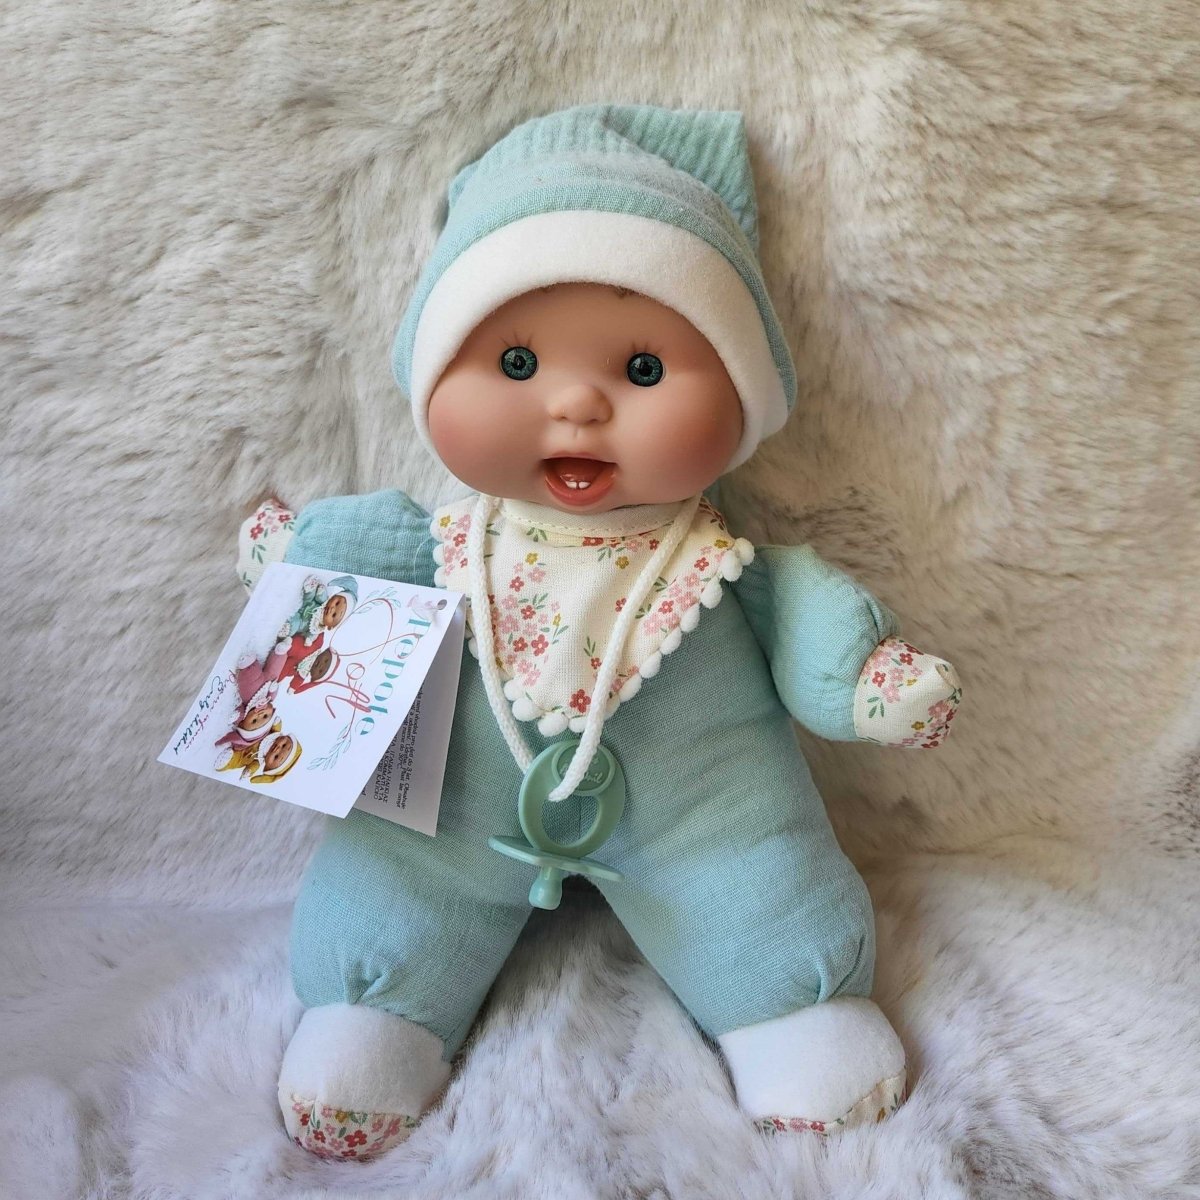 Soft baby doll Pepotes | Nines d Onil | Bee Like Kids